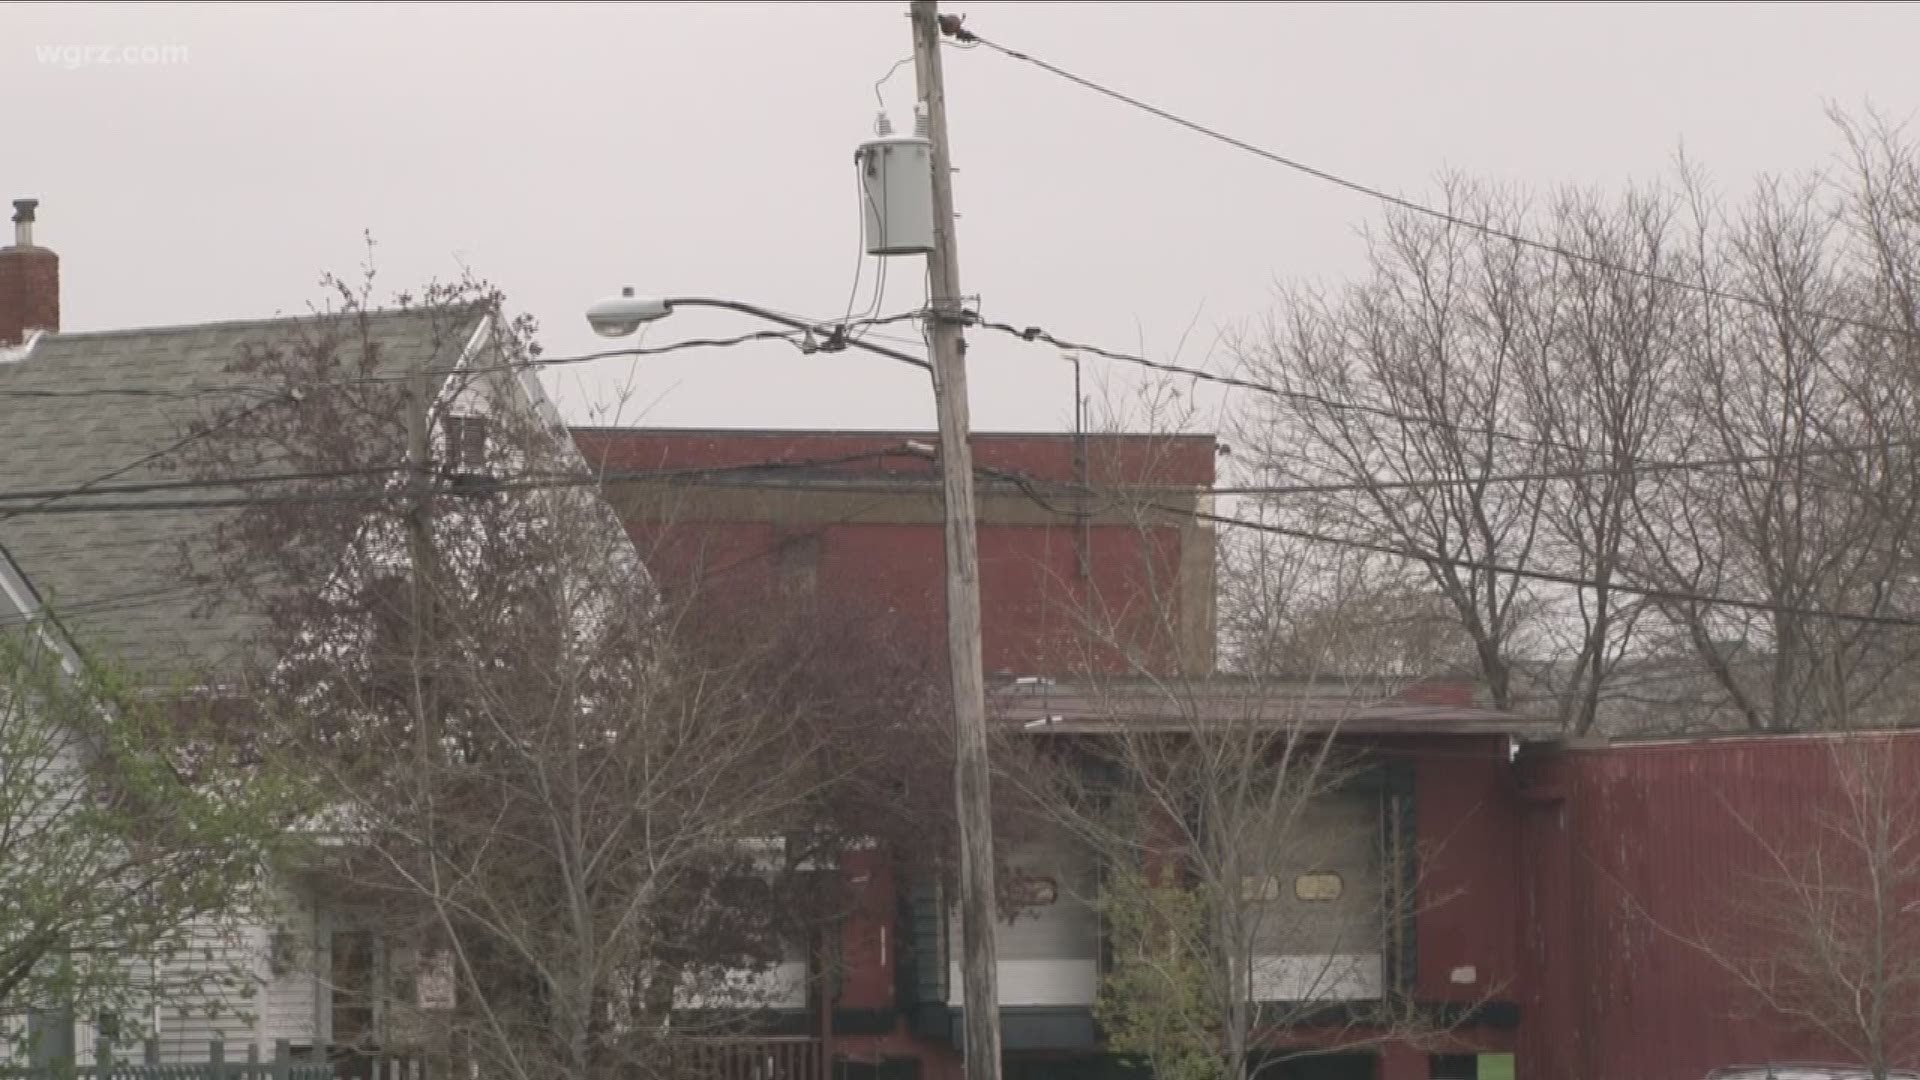 City of Buffalo plans to convert street lights to LED lights